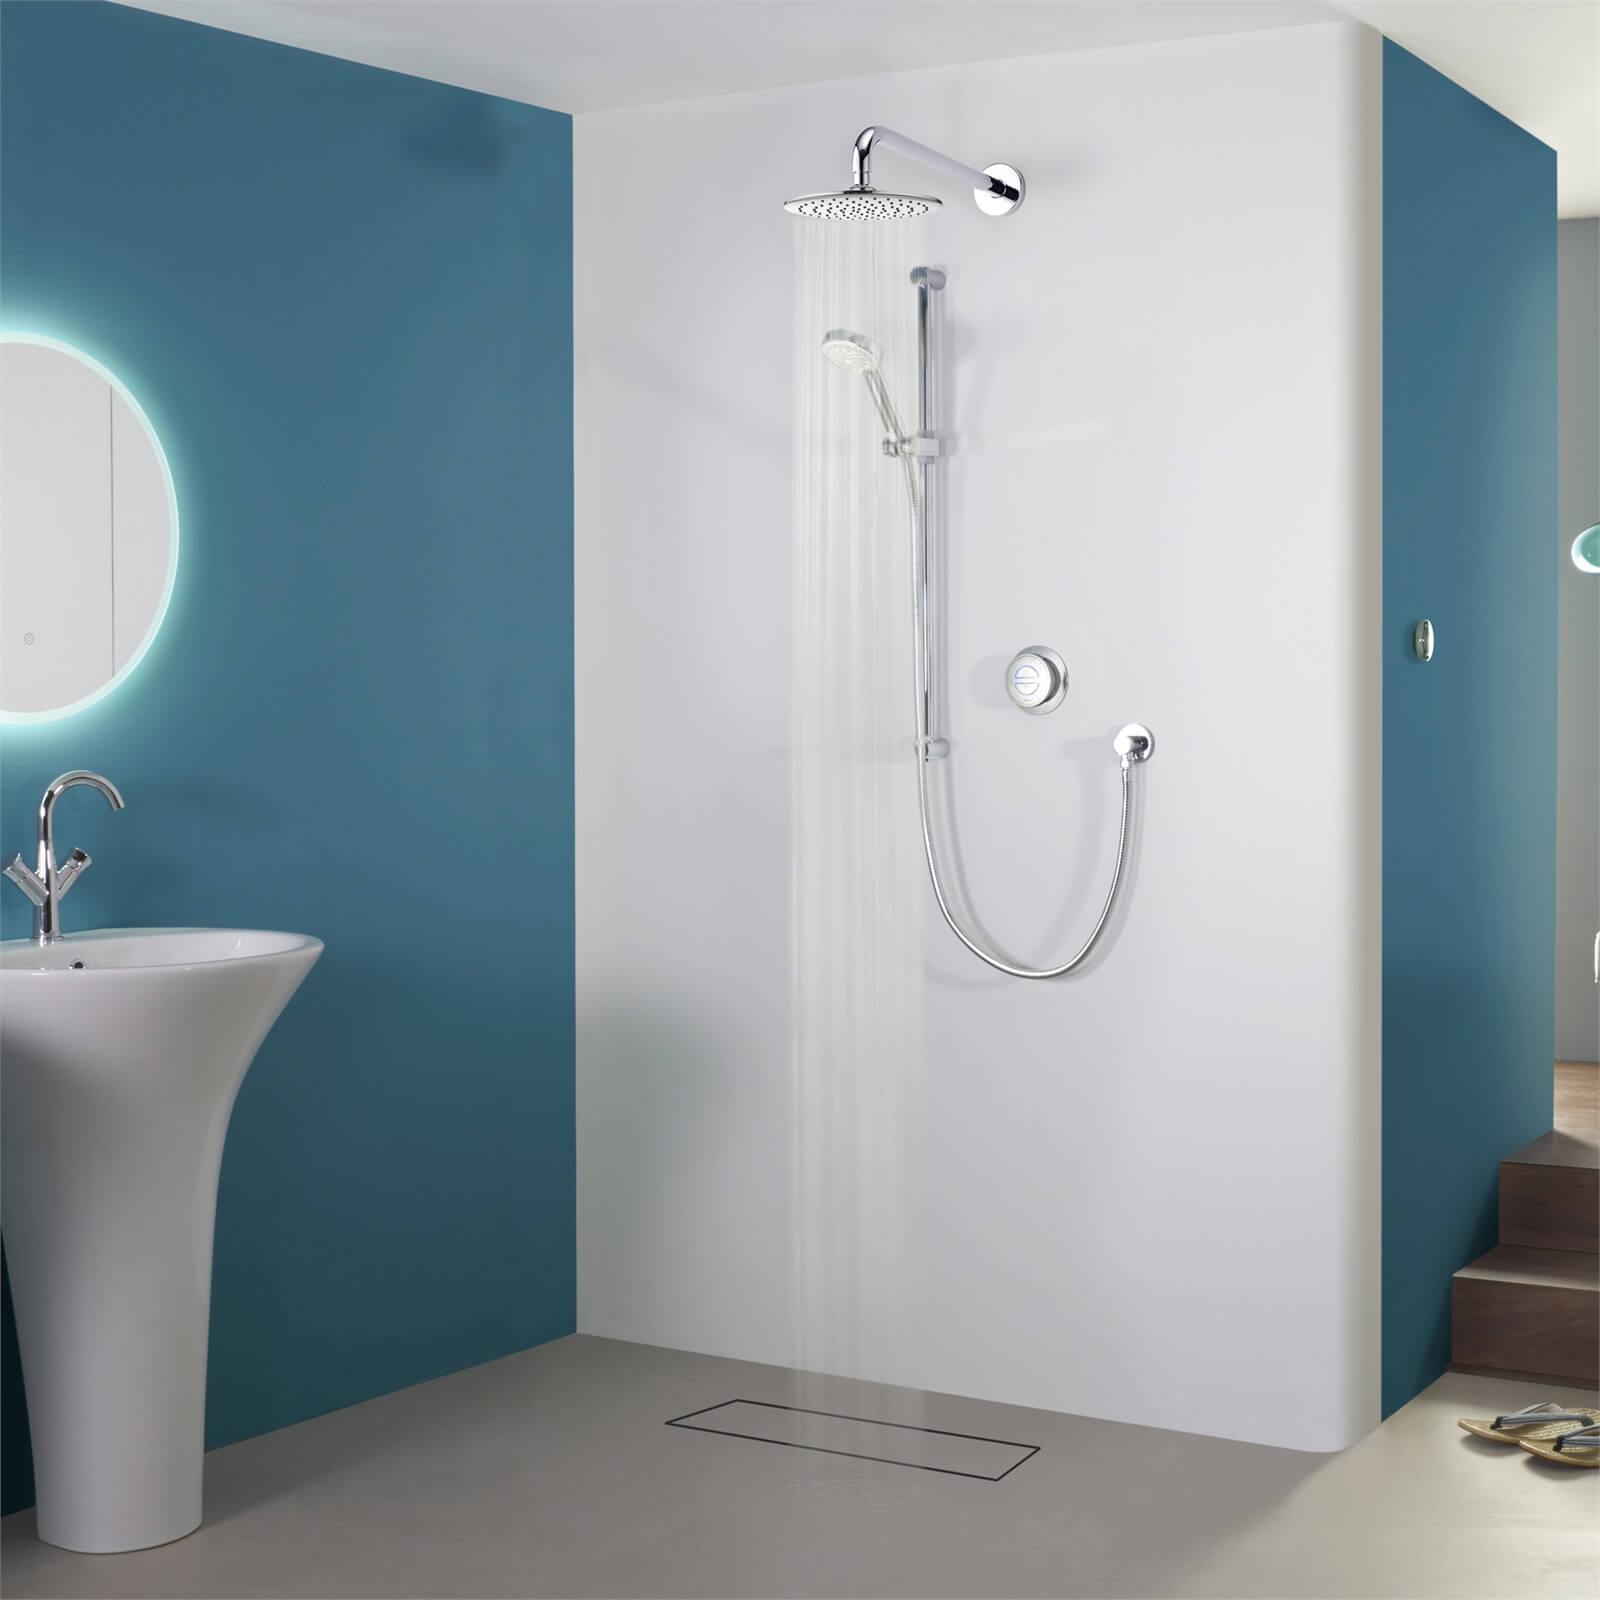 Aqualisa Quartz Concealed with Adjustable and Fixed Wall Heads - High Pressure/Combi